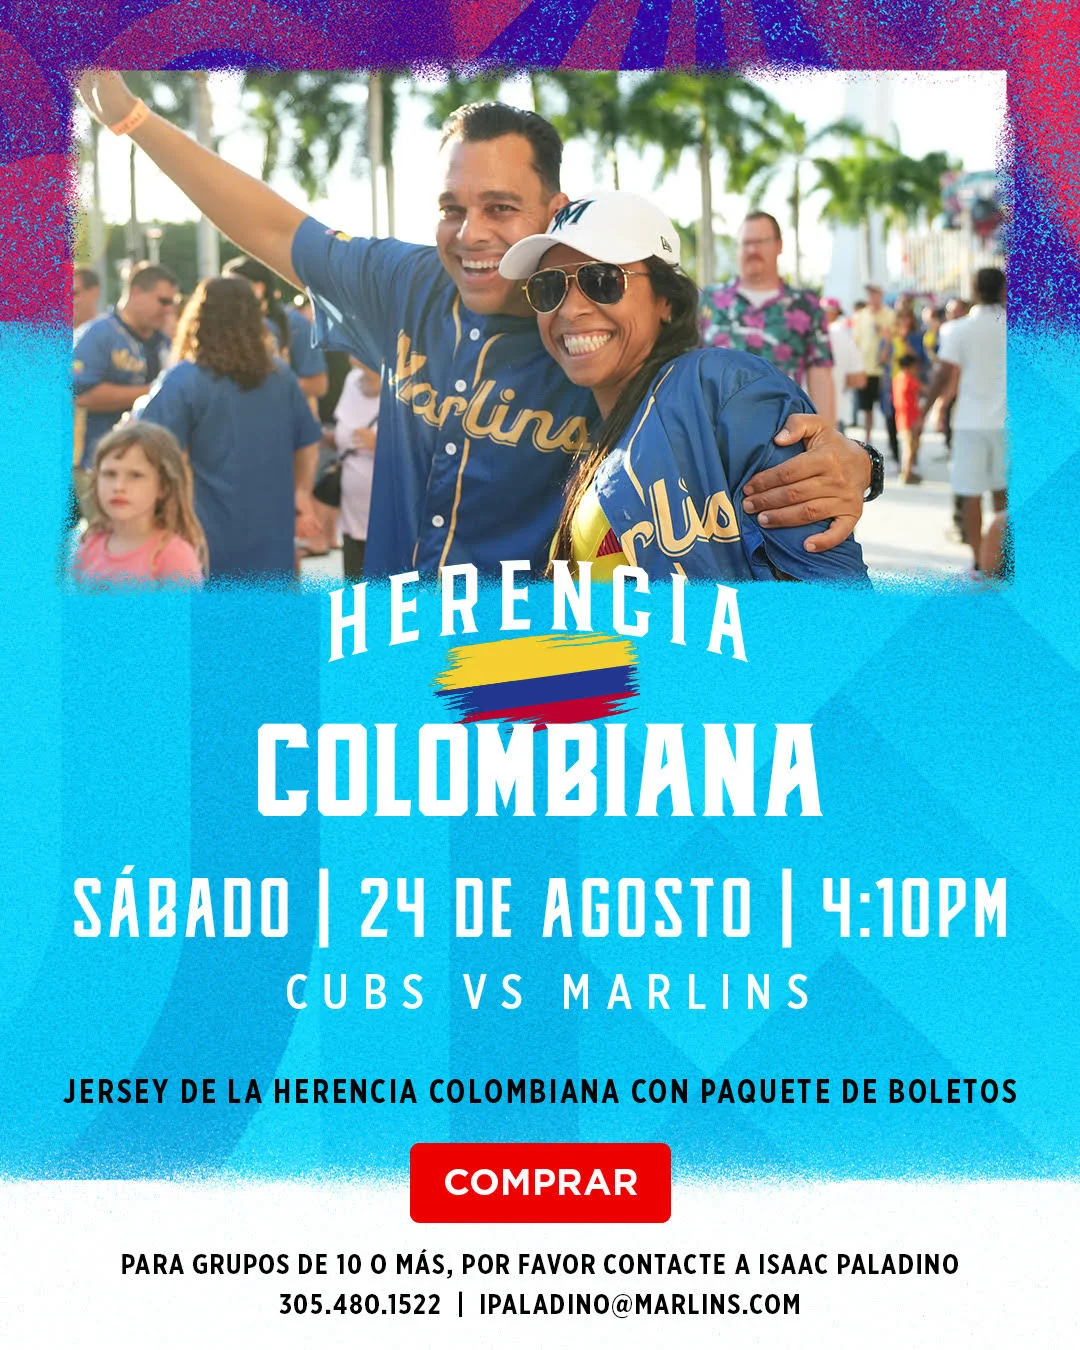 Colombia Heritage Day with the Marlins